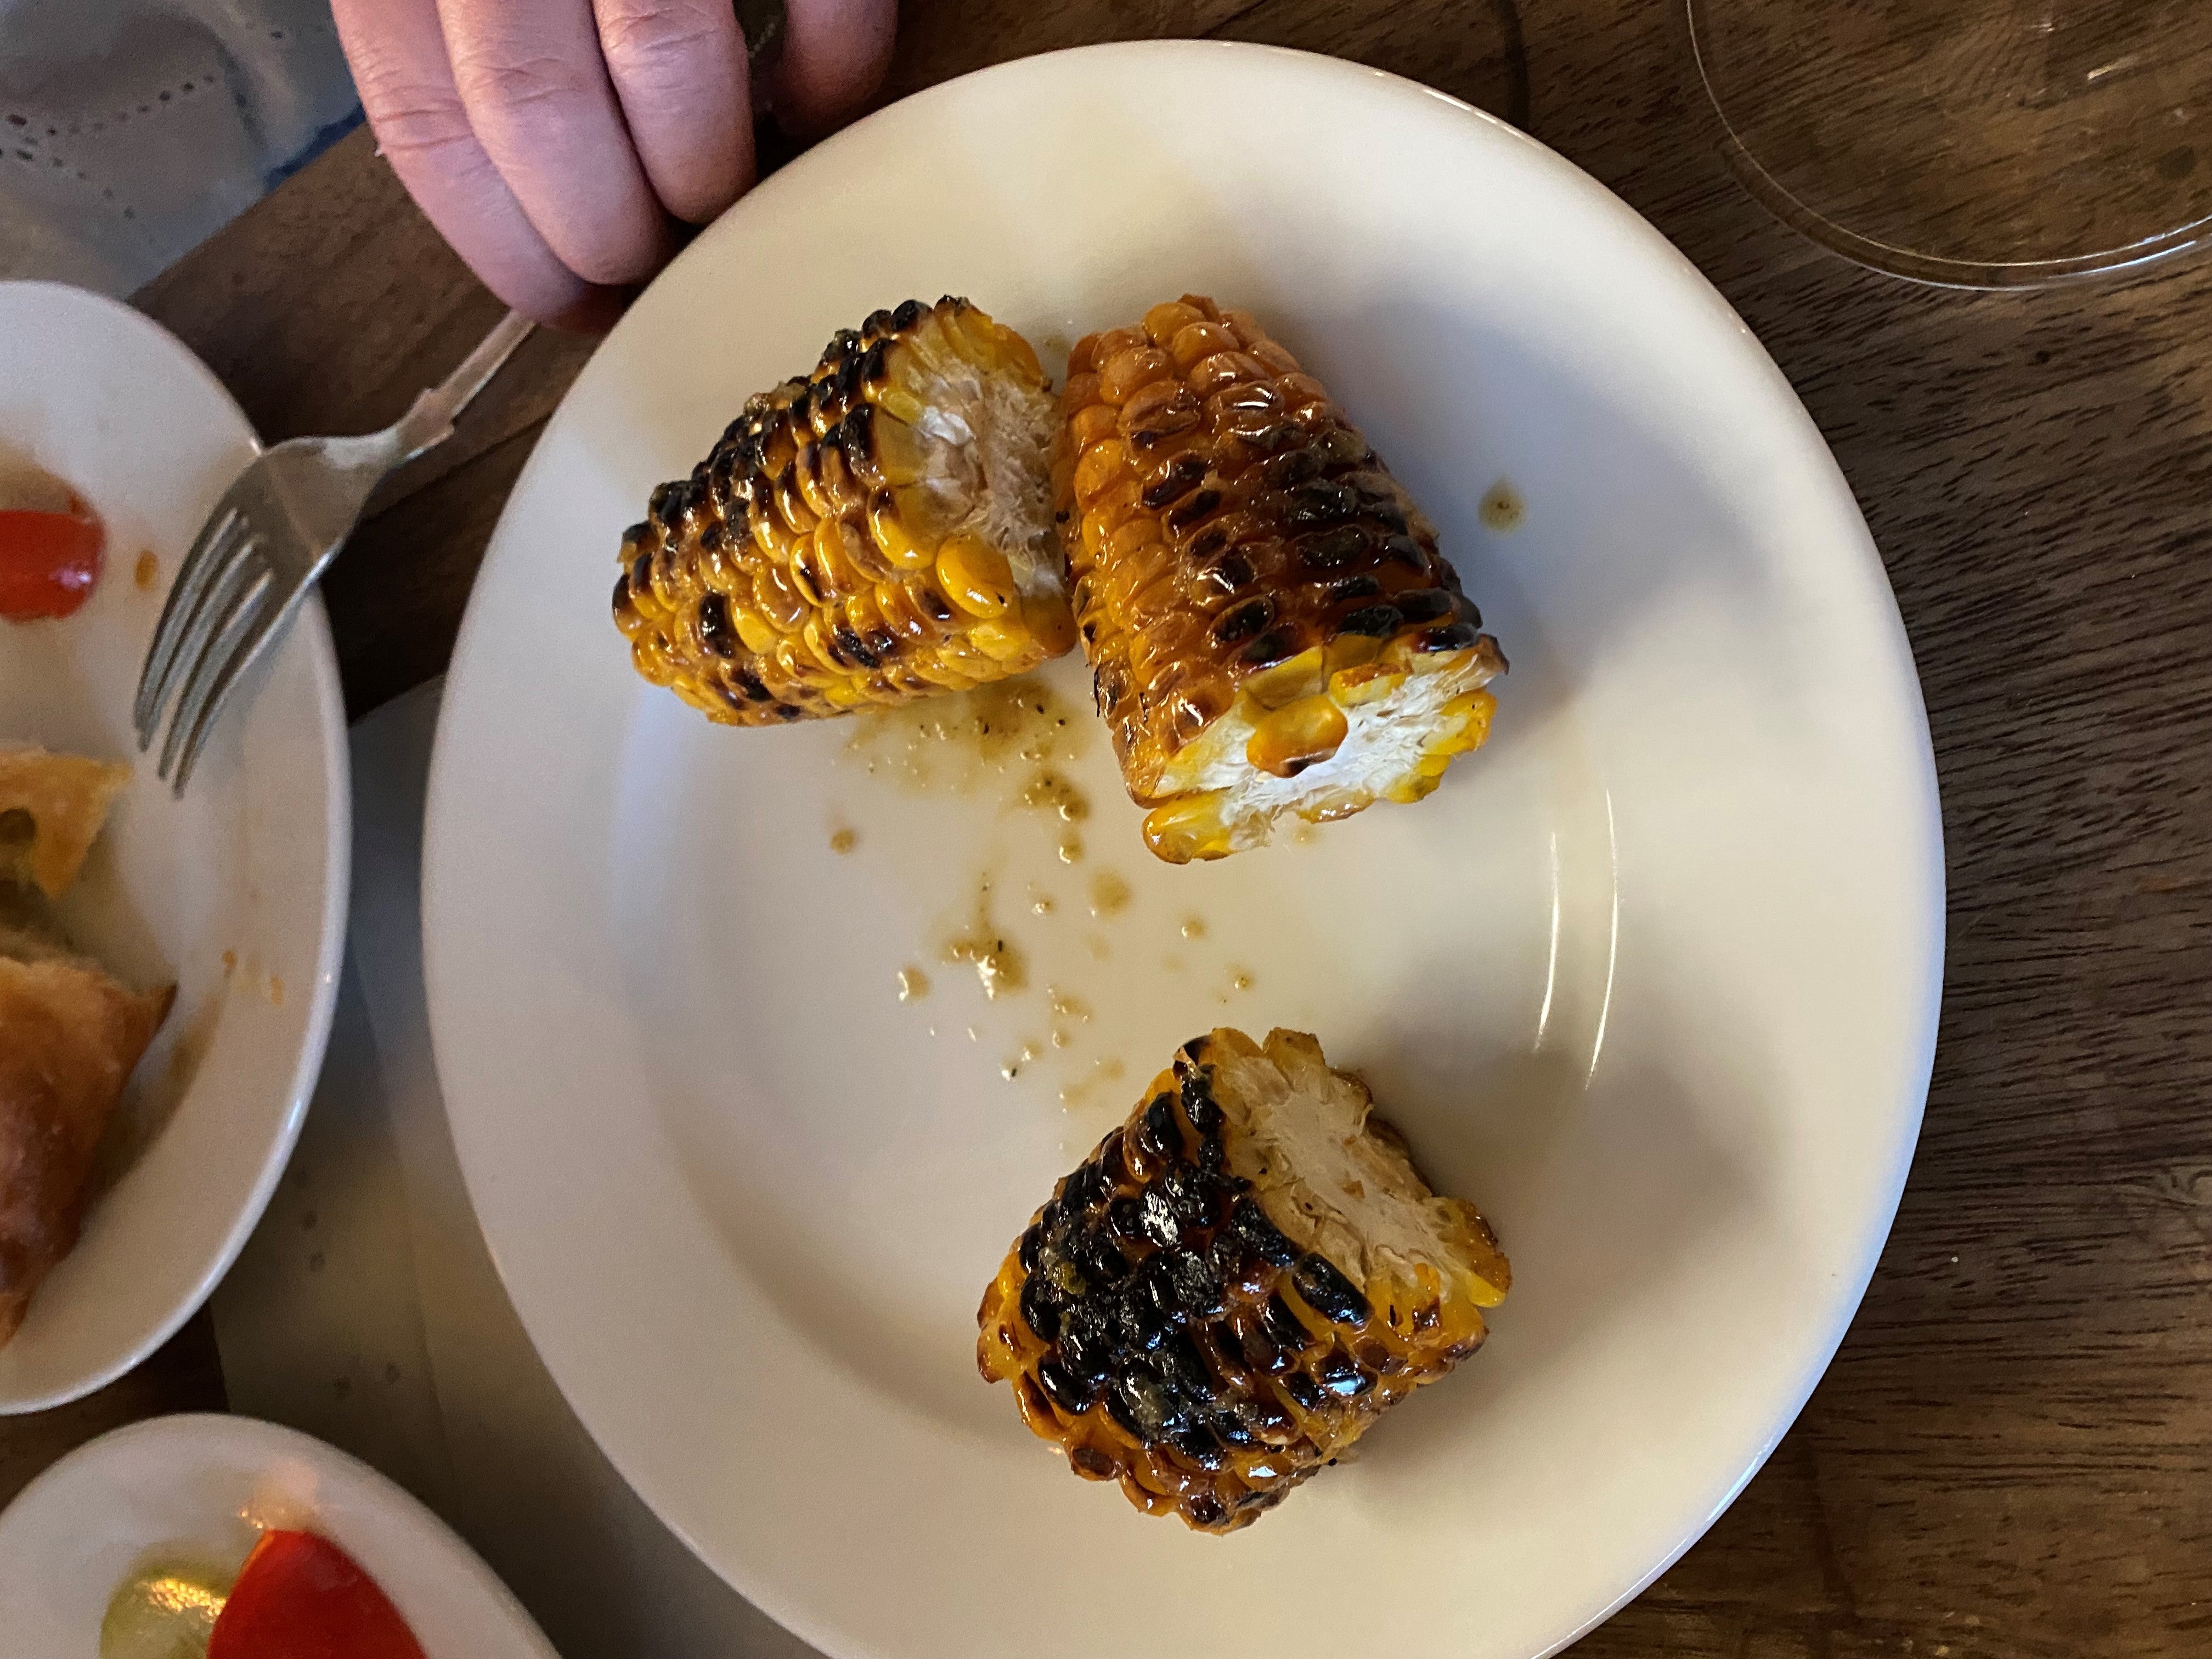 Grilled corn rolled around the plate like forlorn bottles at the footwell of a speeding car